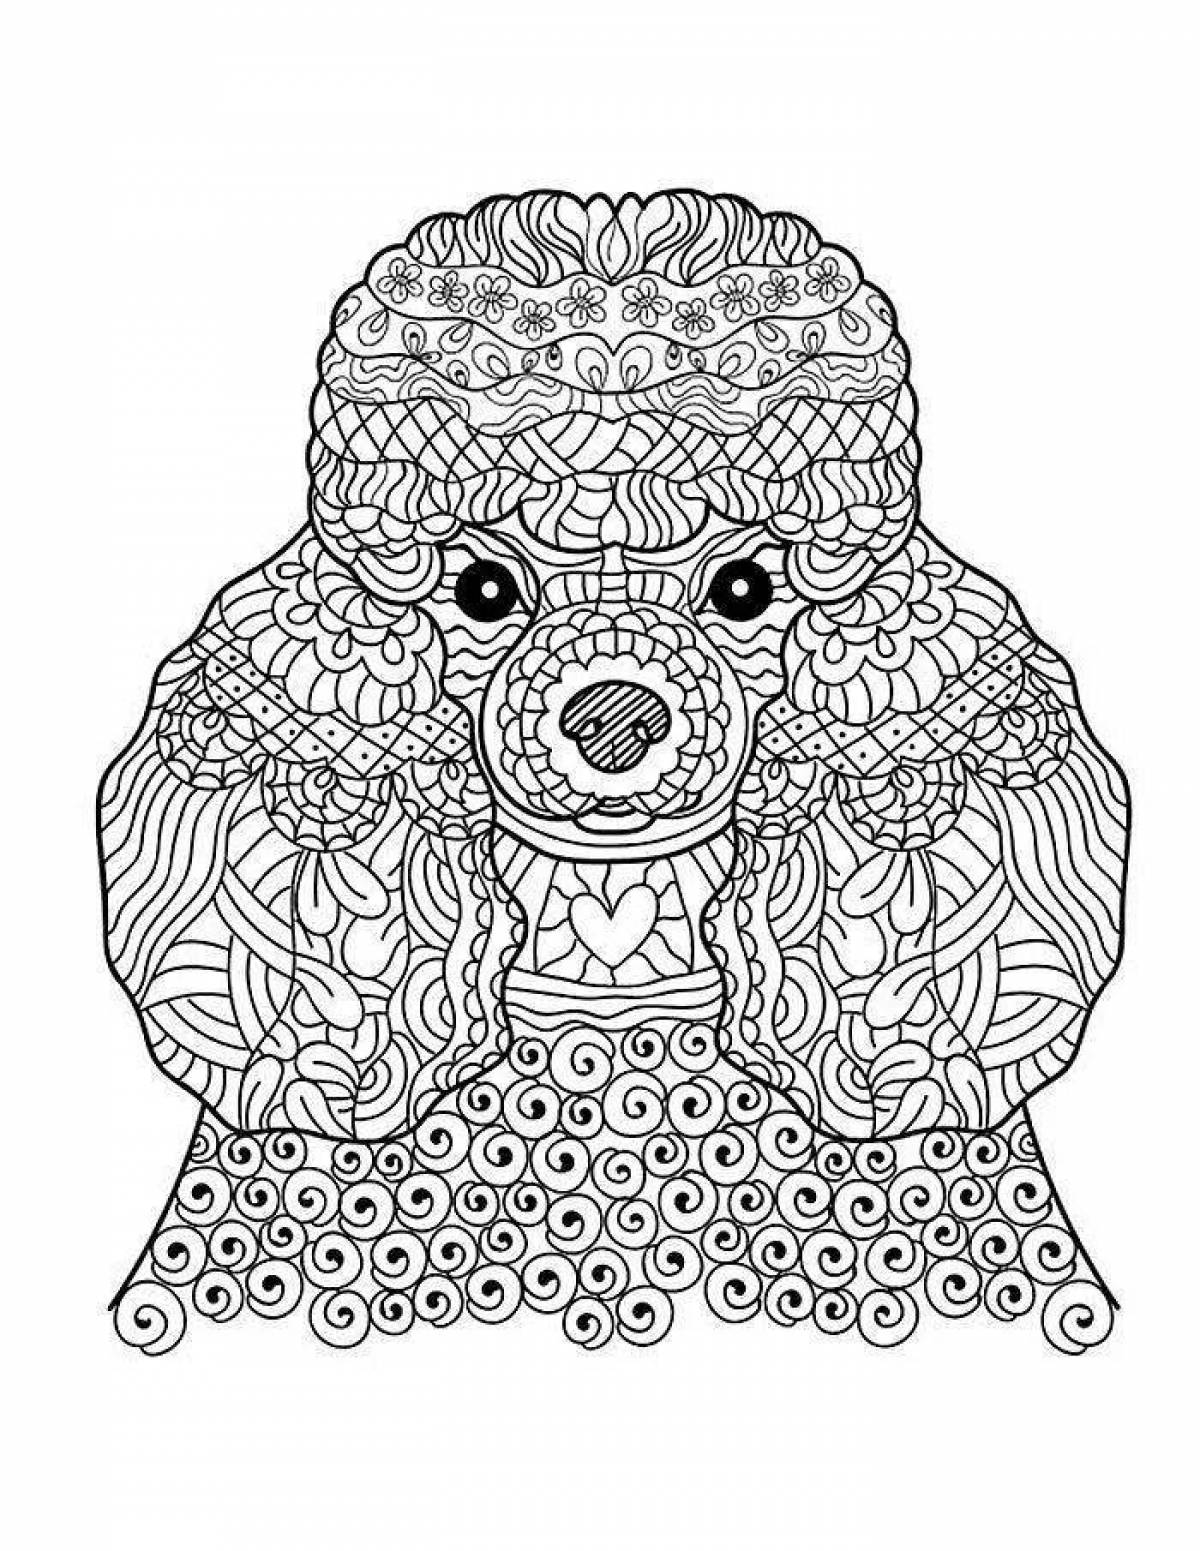 Attractive anti-stress coloring book for dogs